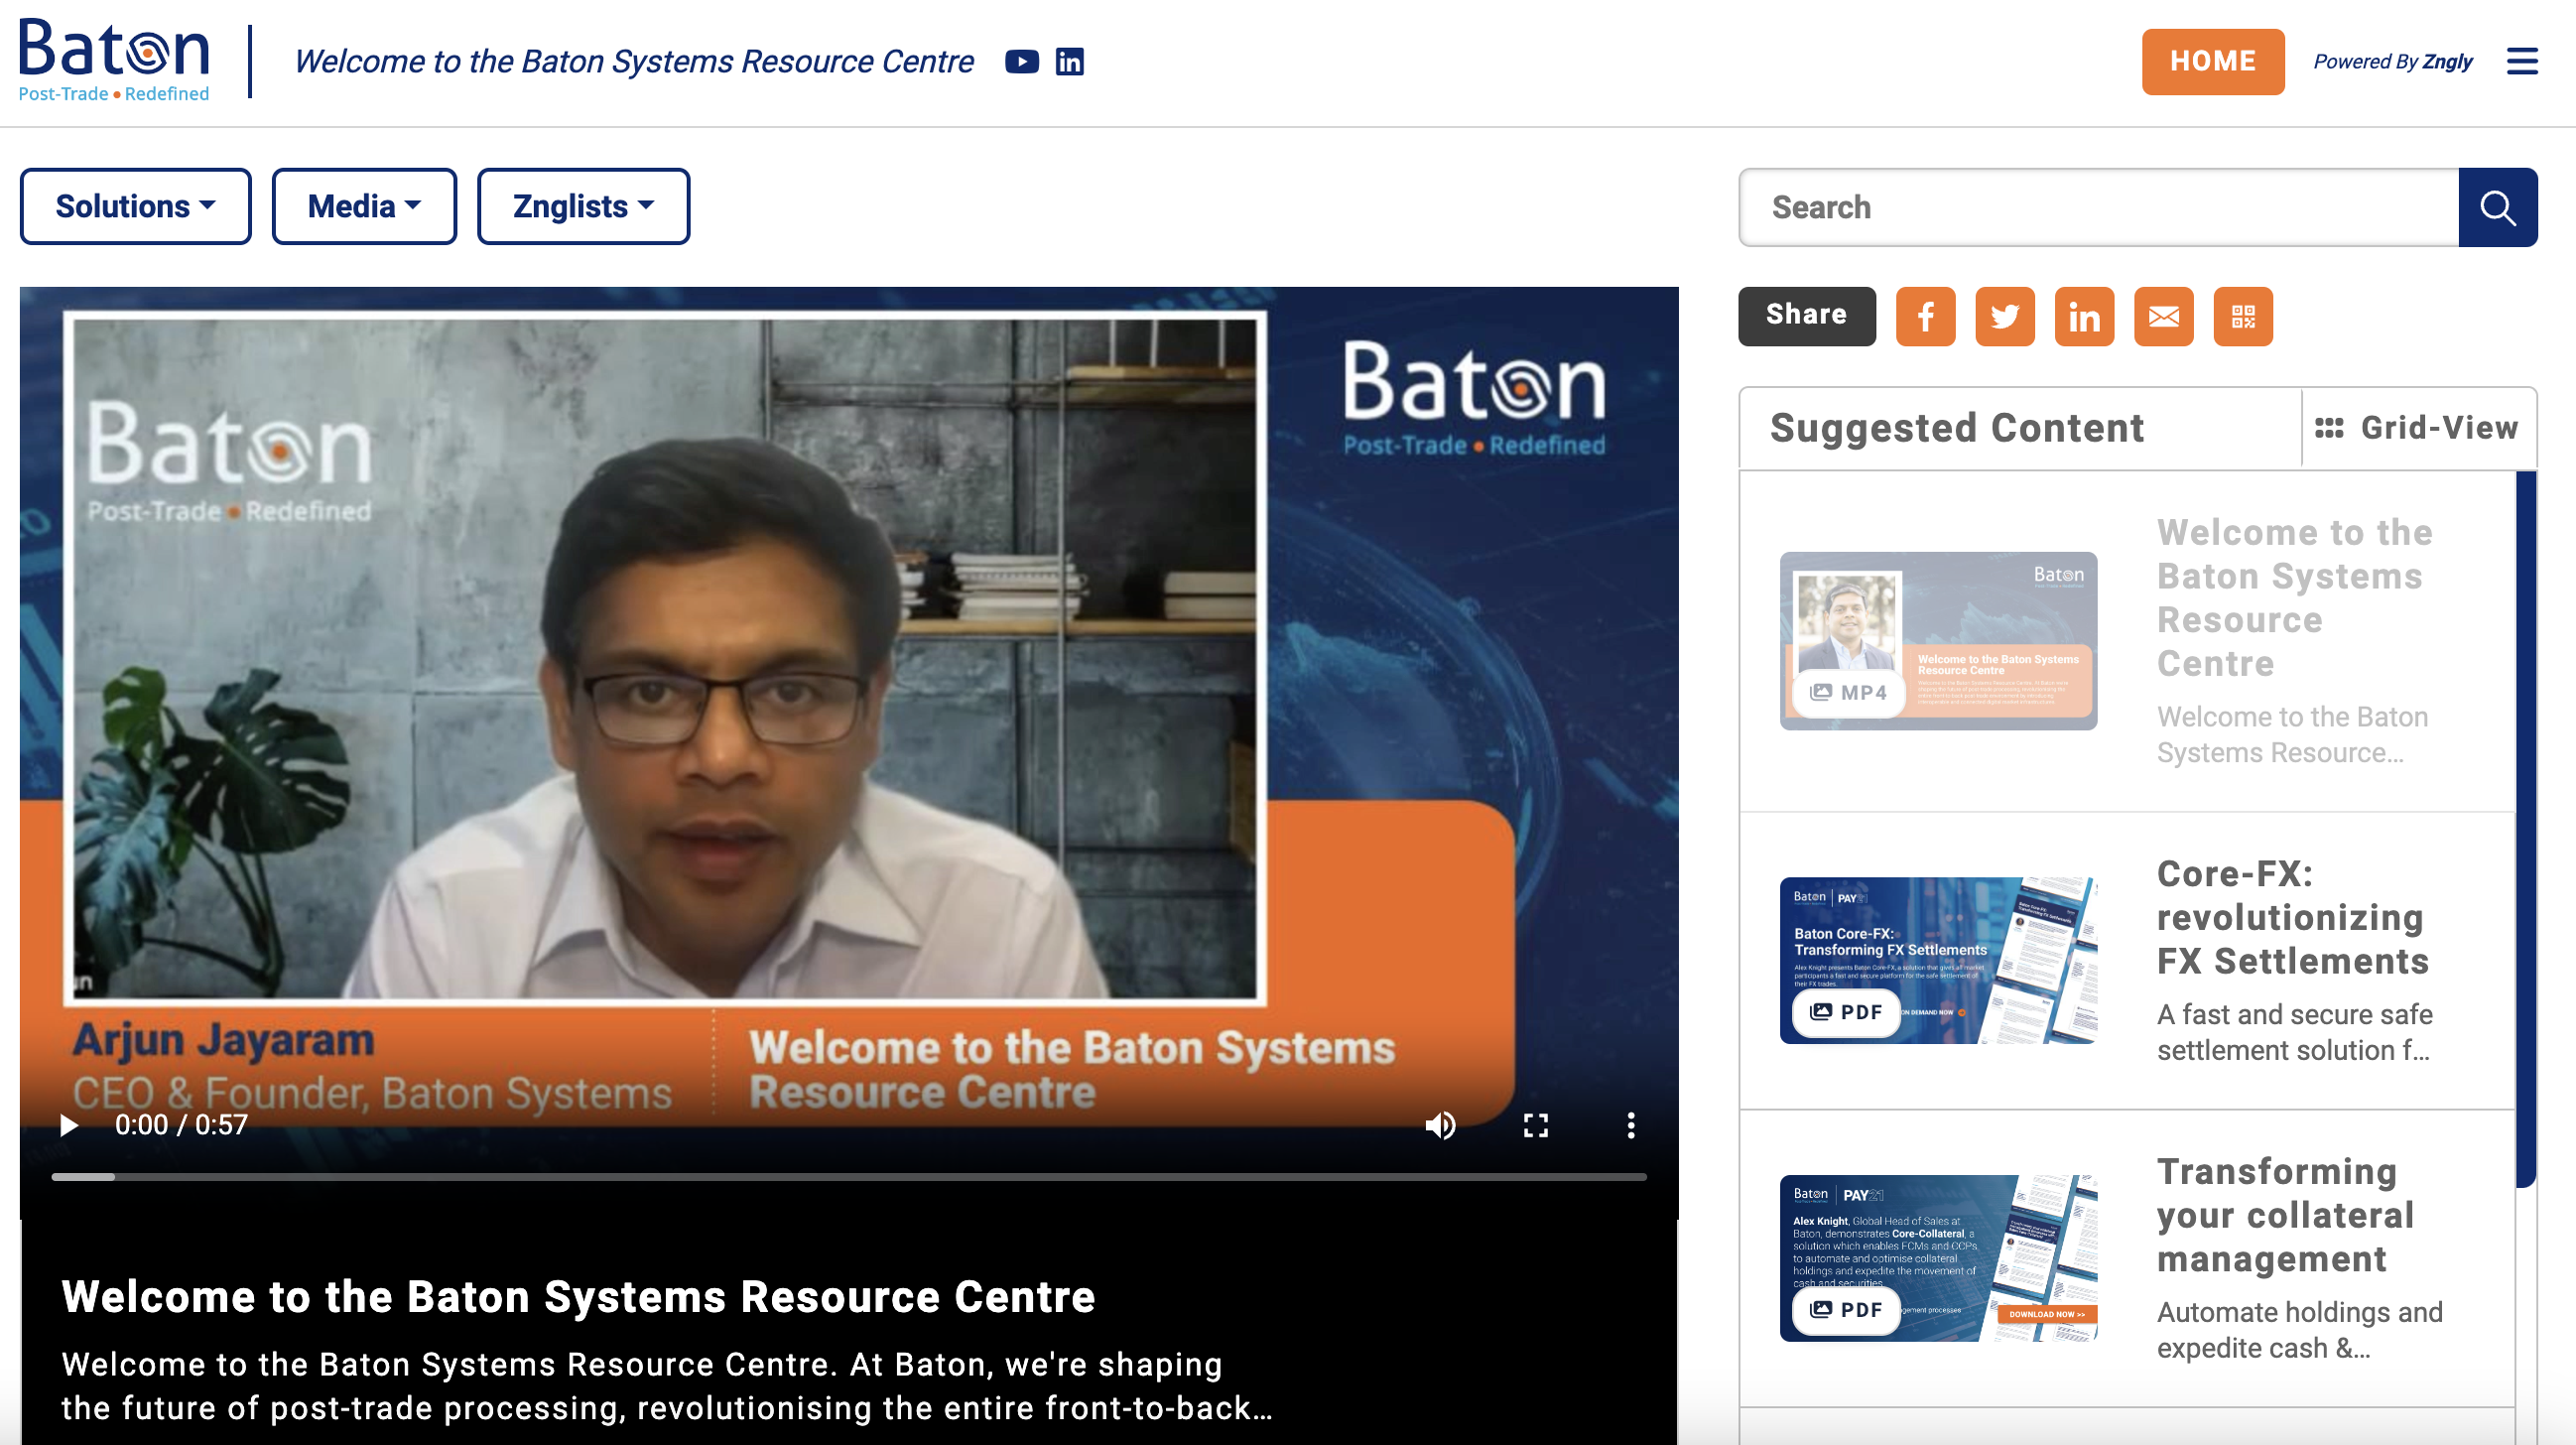 Welcome to Baton Systems Resource Centre